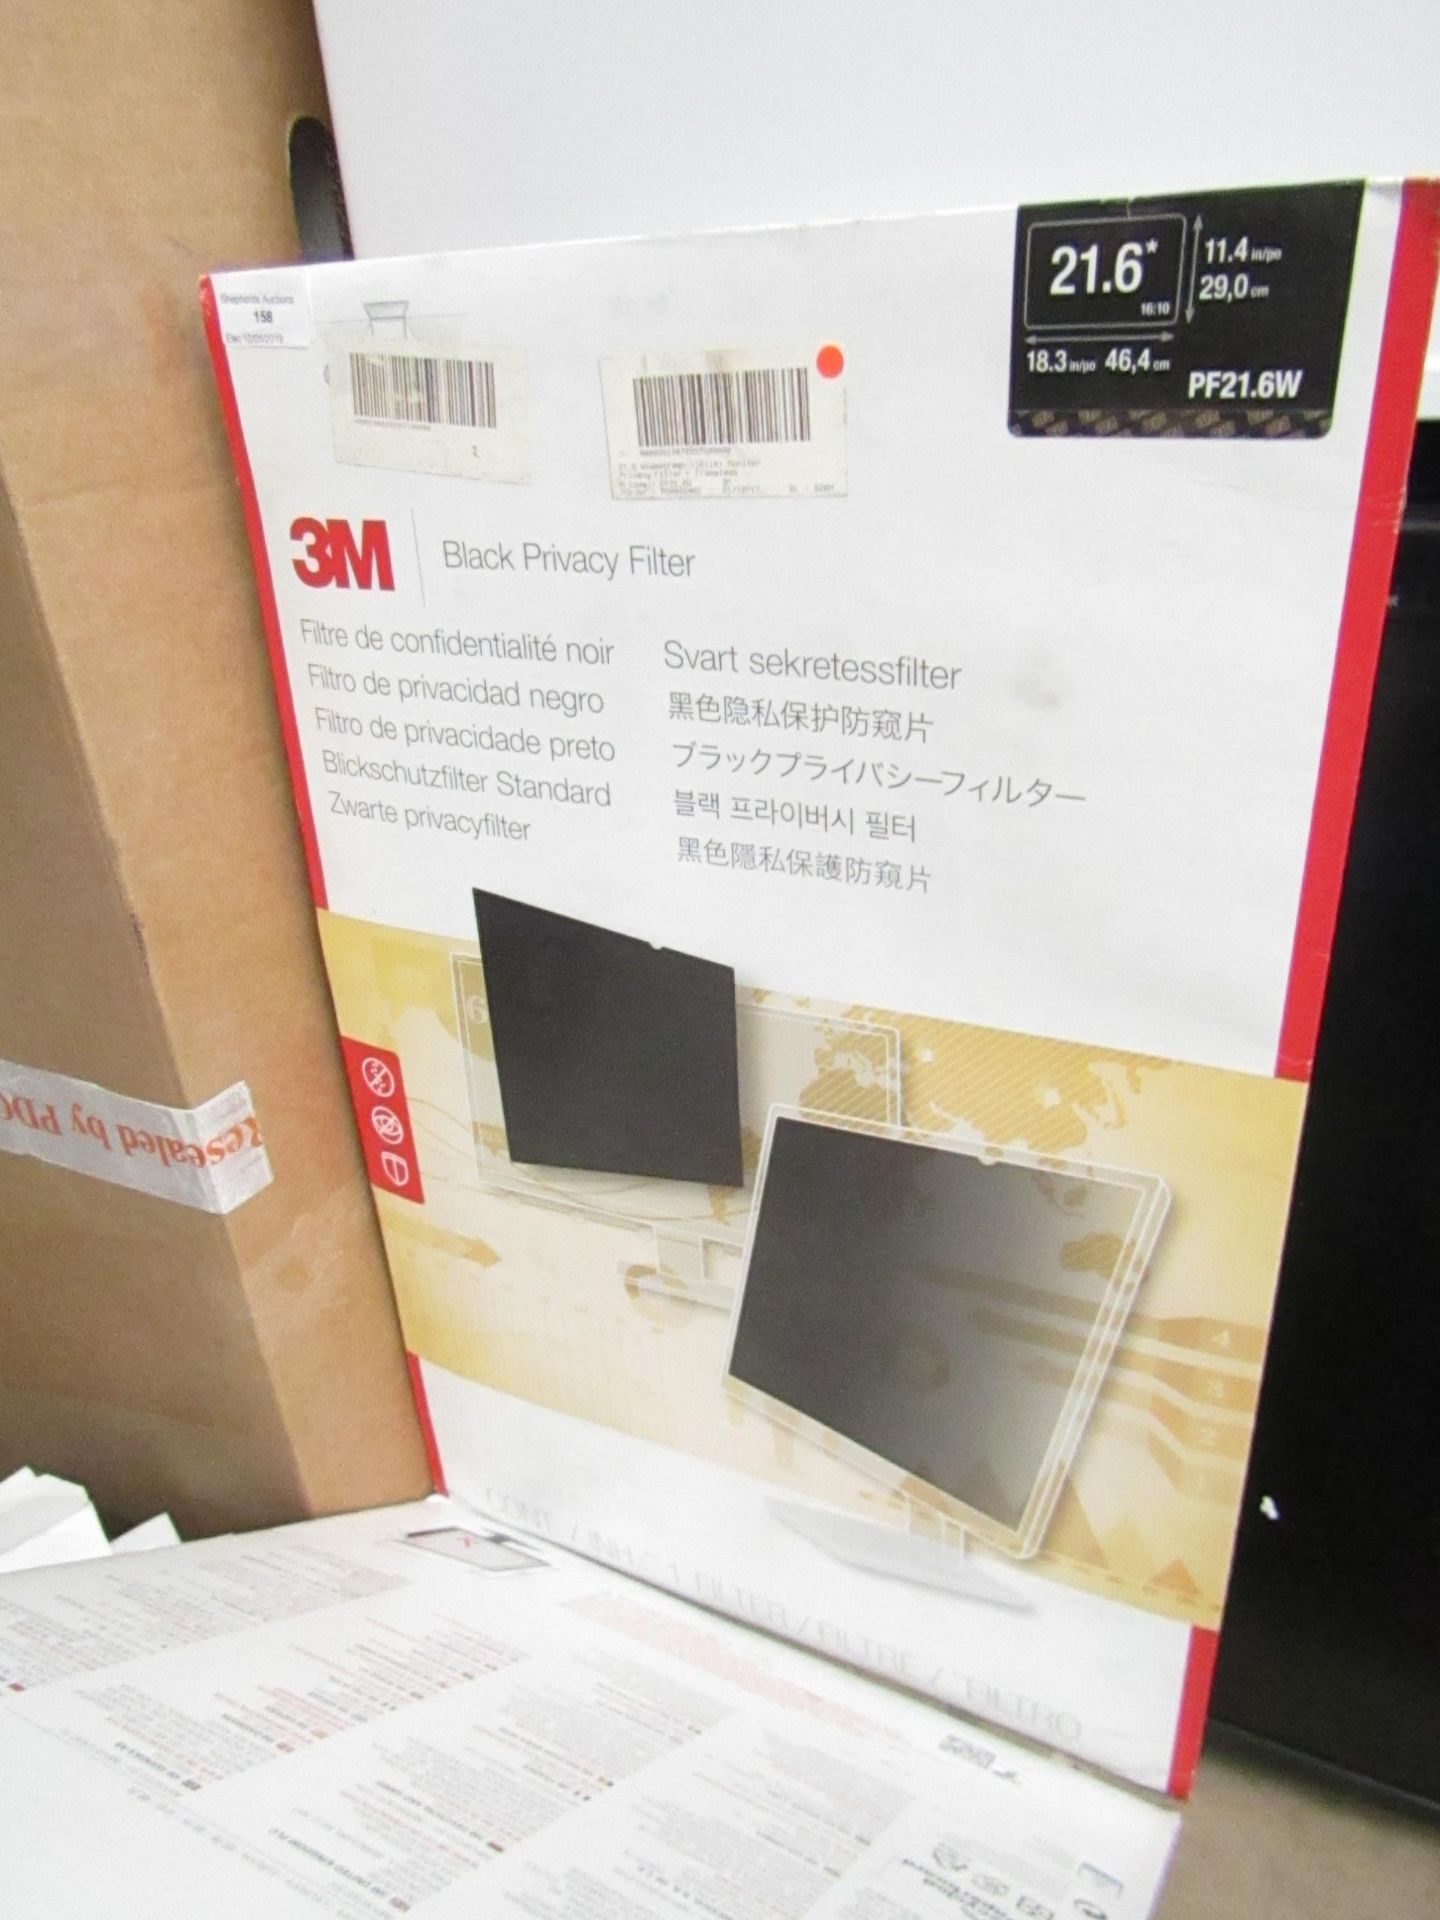 3m Computer privacy filter, in packaging